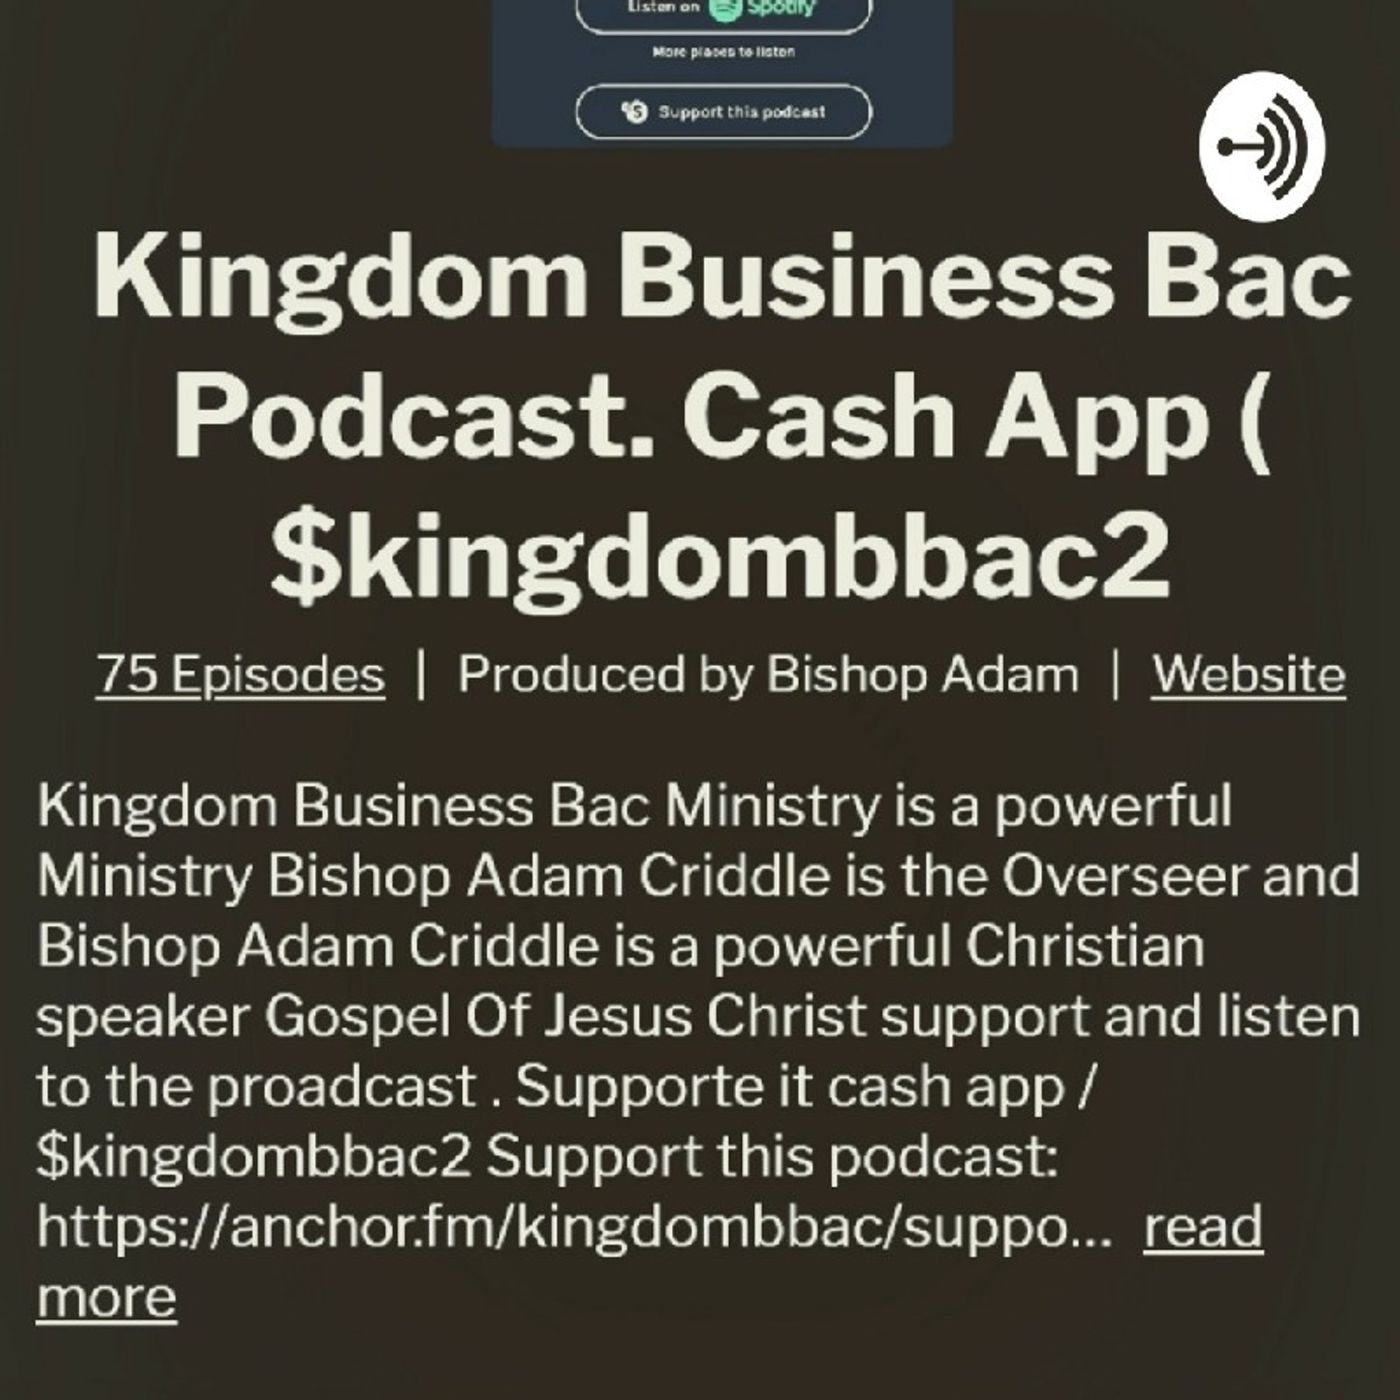 Episode 108 - KIMGDOM BUSINESS Bac Ministry's show